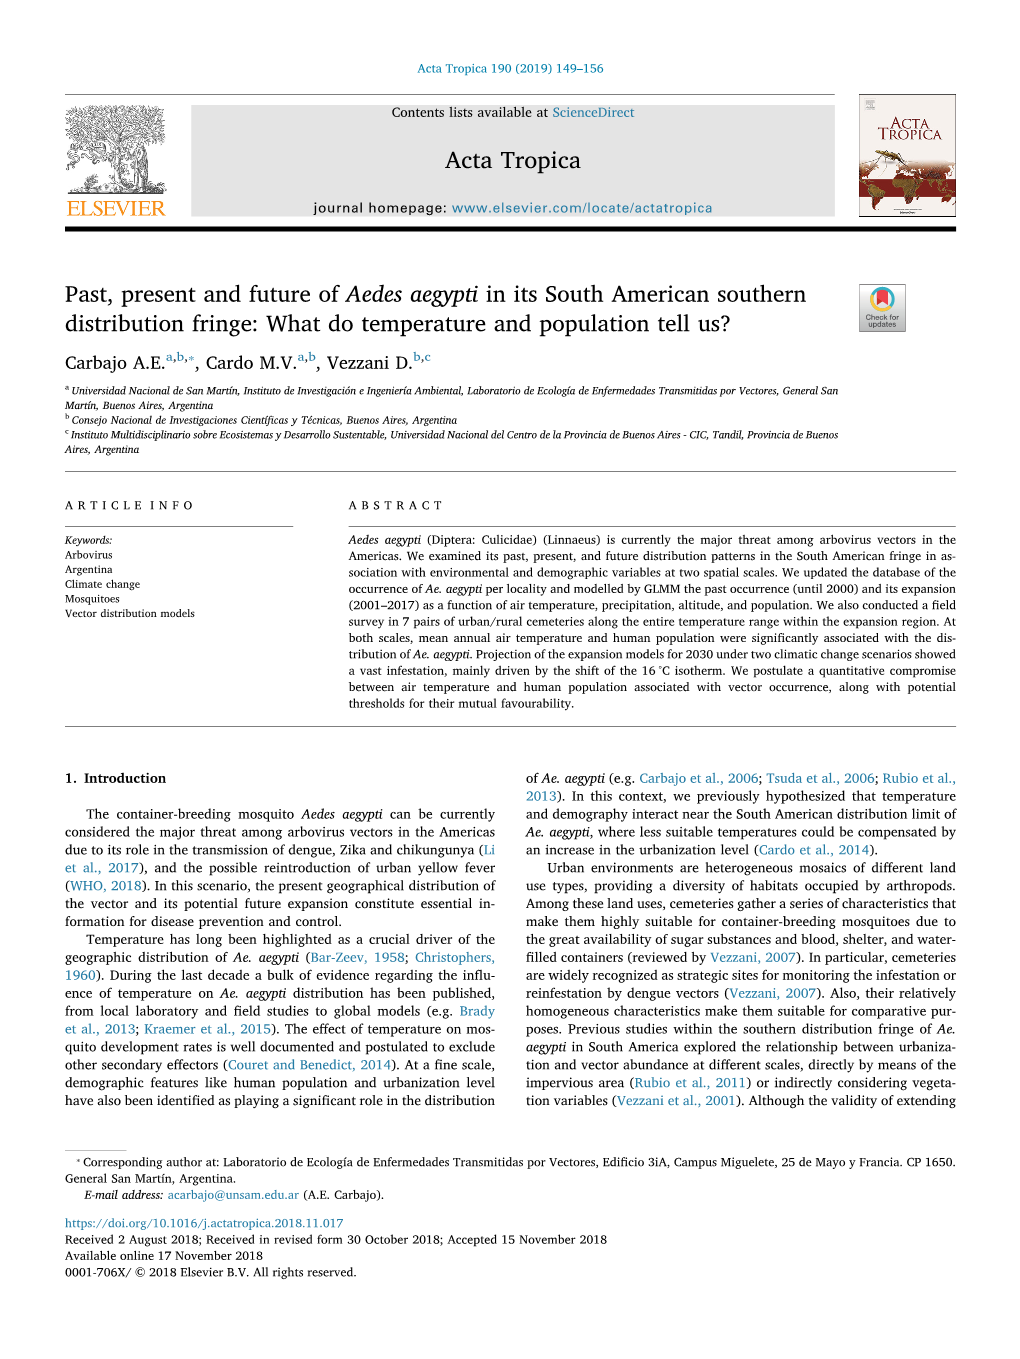 Past, Present and Future of Aedes Aegypti in Its South American